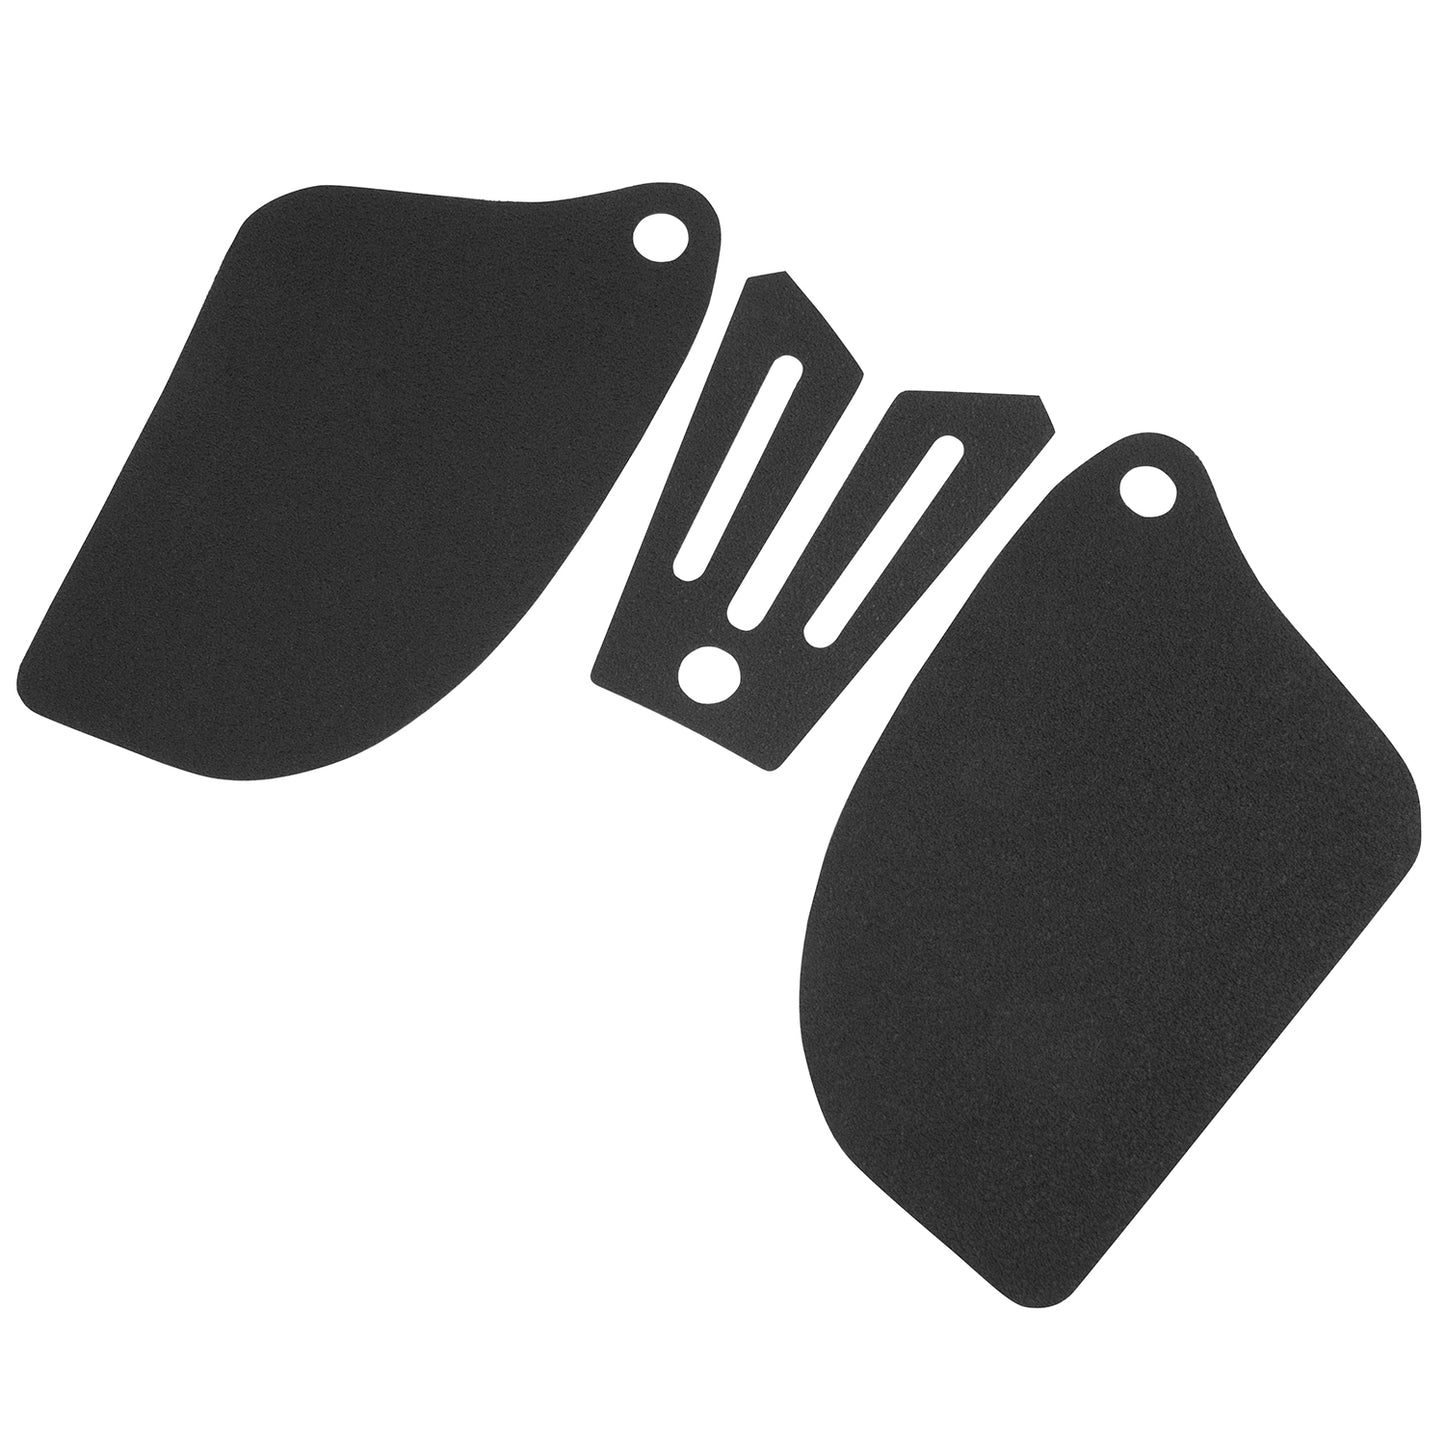 Wolfline Motorcycle Accessories Anti Slip Tank Pad Stickers Side Gas Tank Pad Knee Grip Decals Protection For CFMOTO 650 TR-G